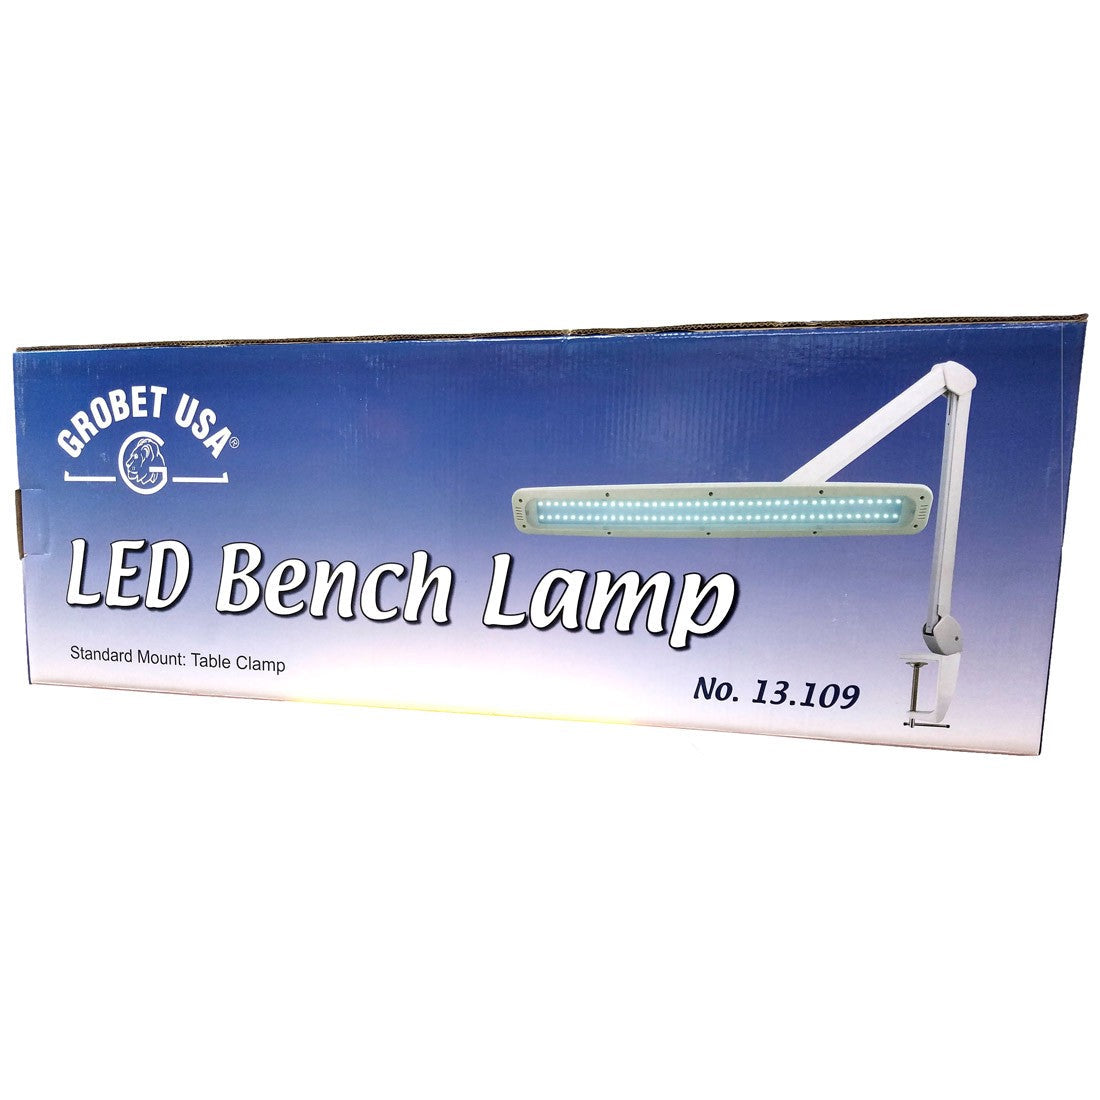 Grobet USA Professional LED Bench Lamp with Dimmer Switch